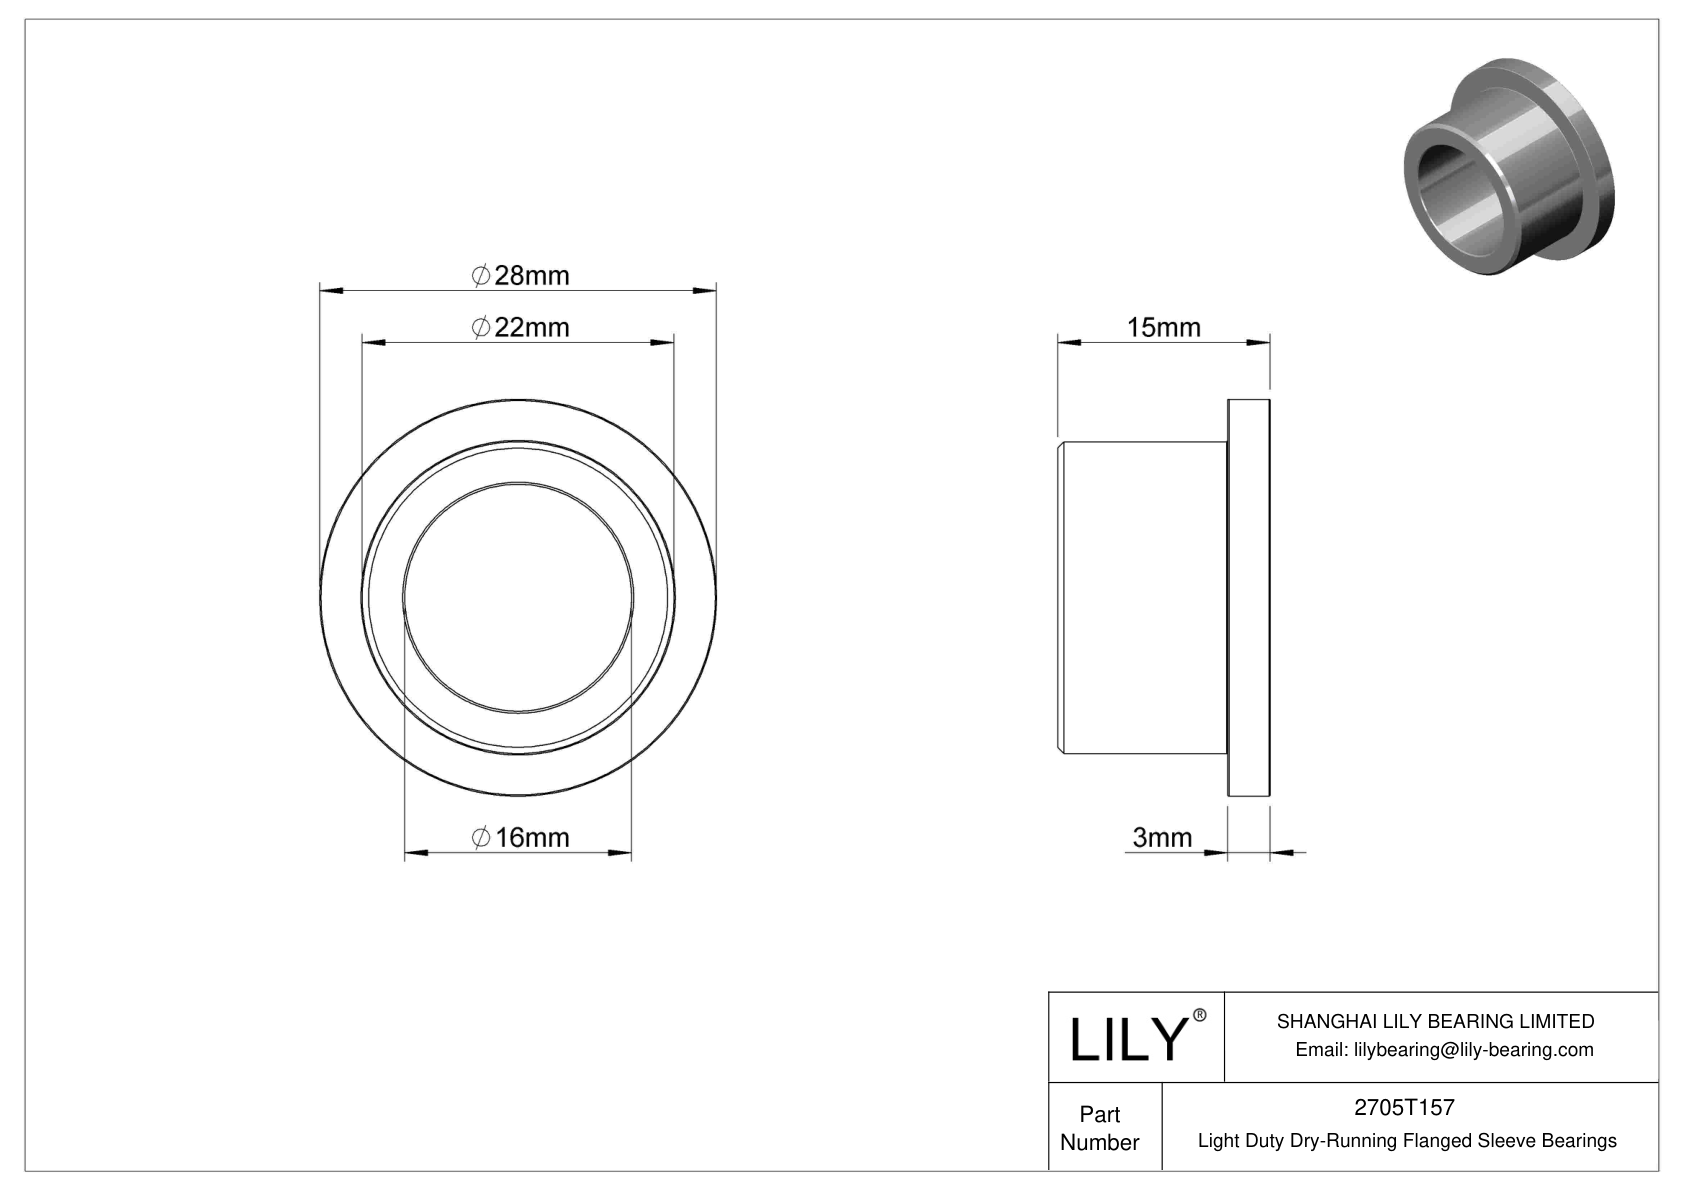 CHAFTBFH Light Duty Dry-Running Flanged Sleeve Bearings cad drawing